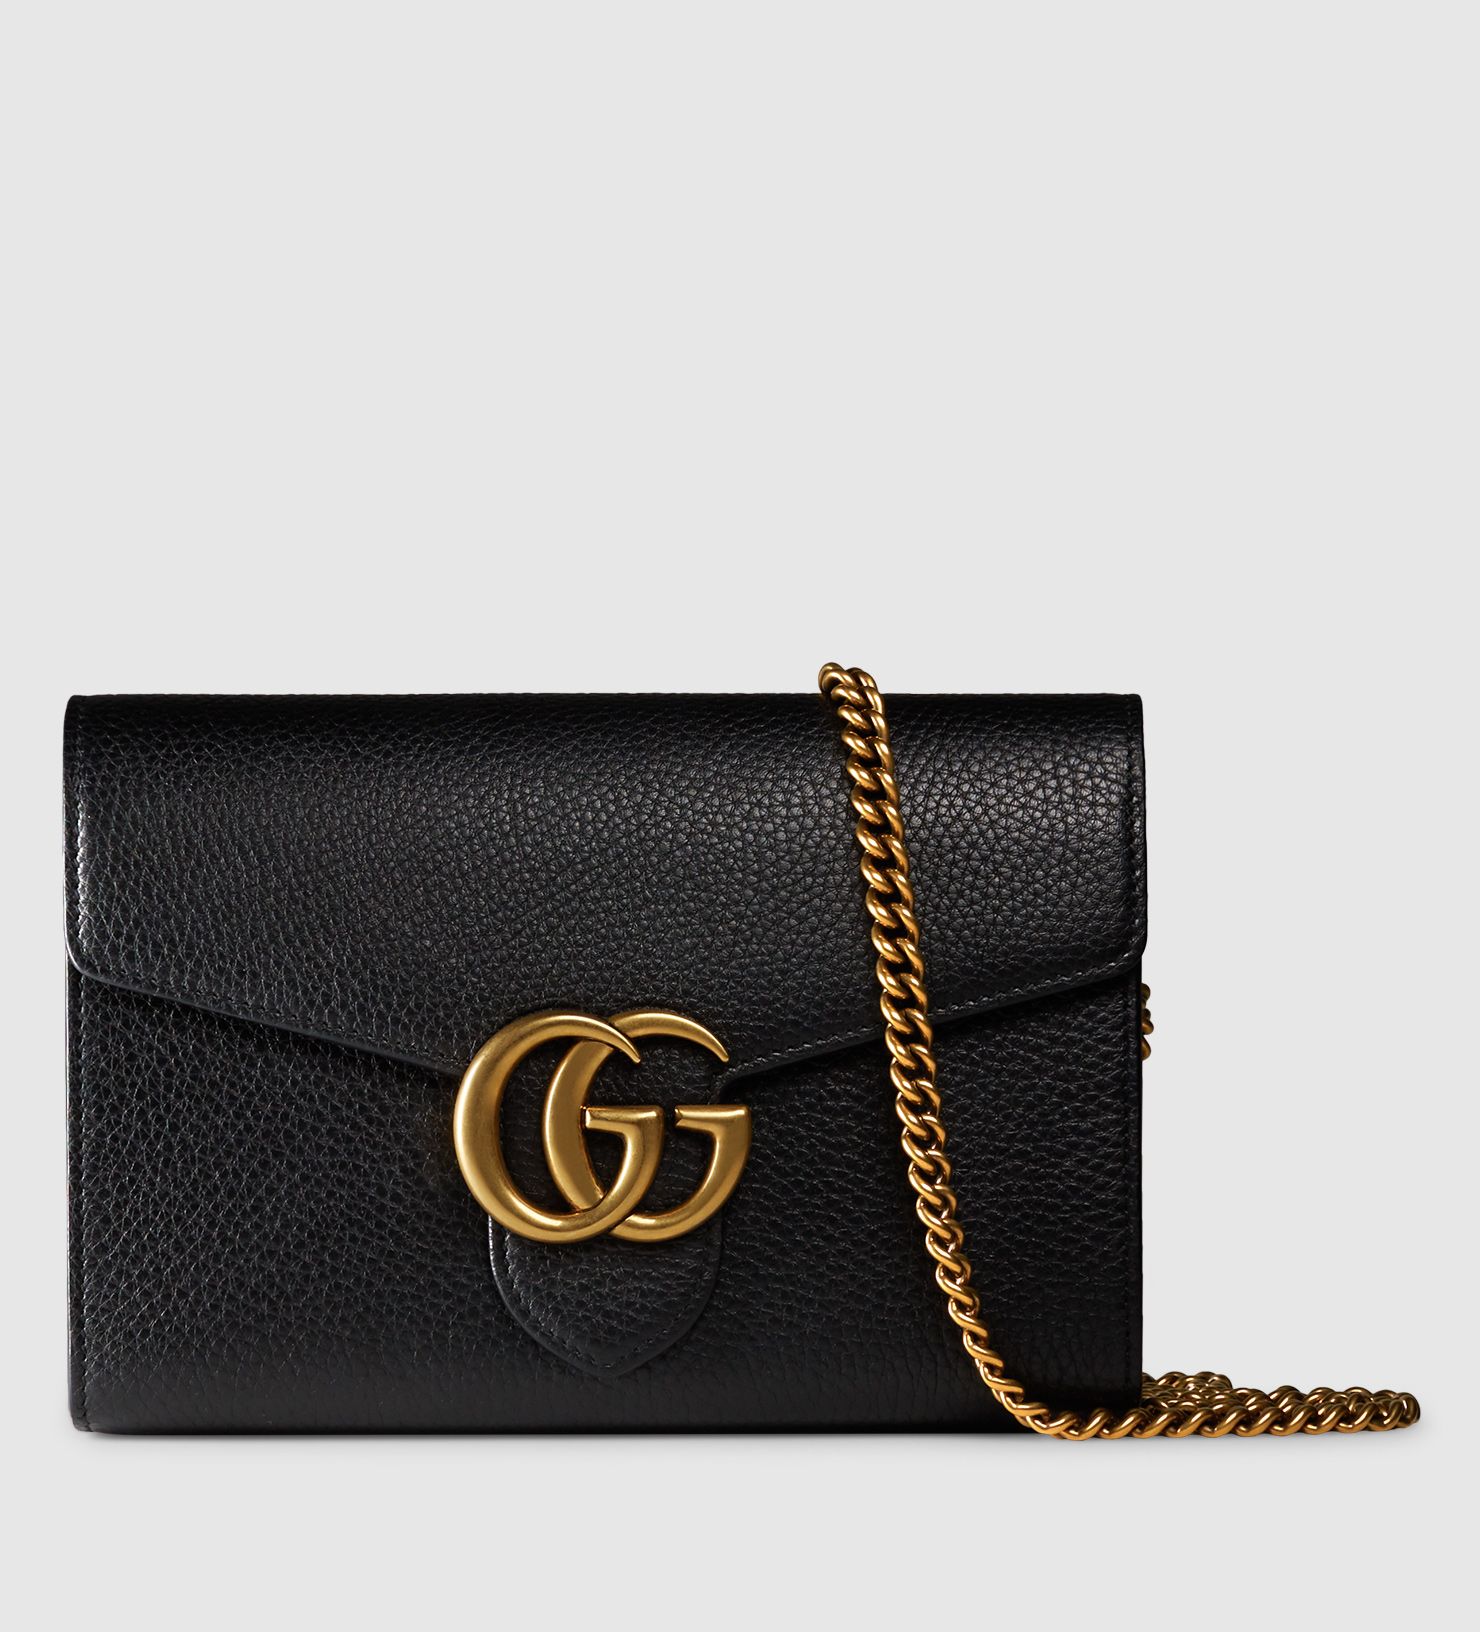 Lyst - Gucci Gg Marmont Leather Chain Wallet in Black